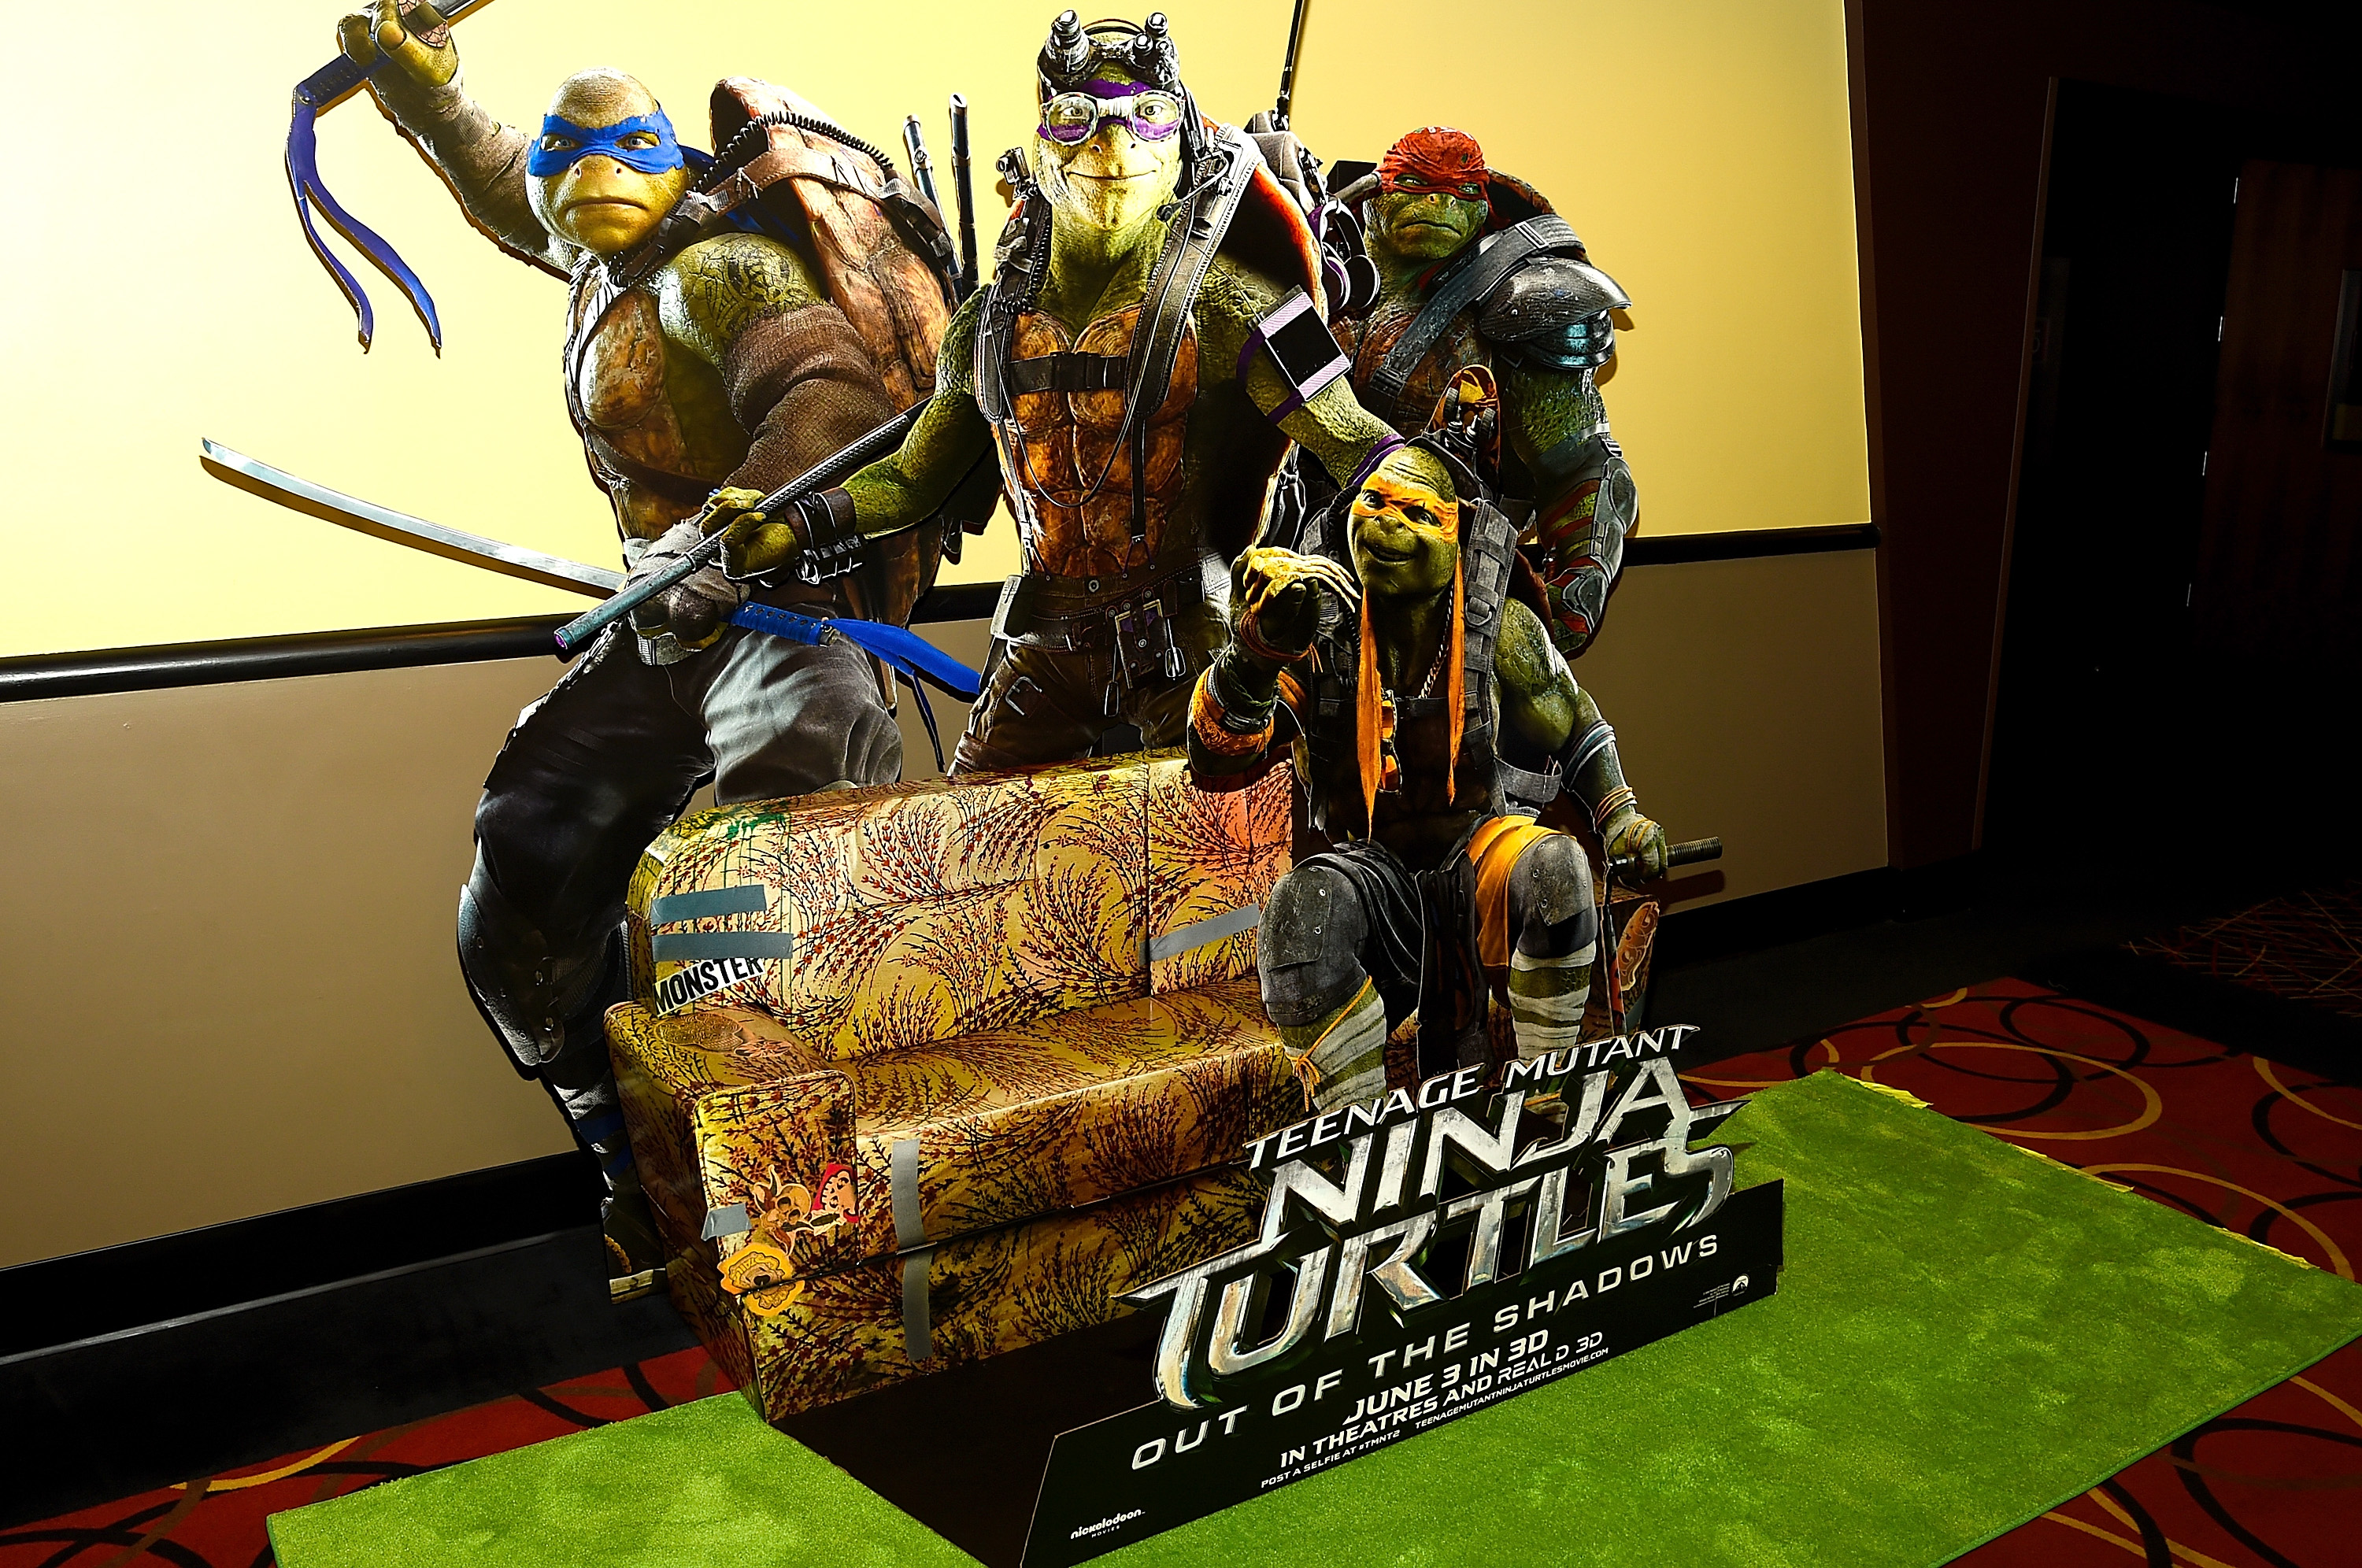 ATLANTA, GA - MAY 26: A general view at the Atlanta Screening of the Paramount Pictures title "Teenage Mutant Ninja Turtles: Out of the Shadows", on May 26, 2016 at AMC Phipps Plaza in Atlanta, Georgia.   Rick Diamond/Getty Images for Paramount Pictures/AFP